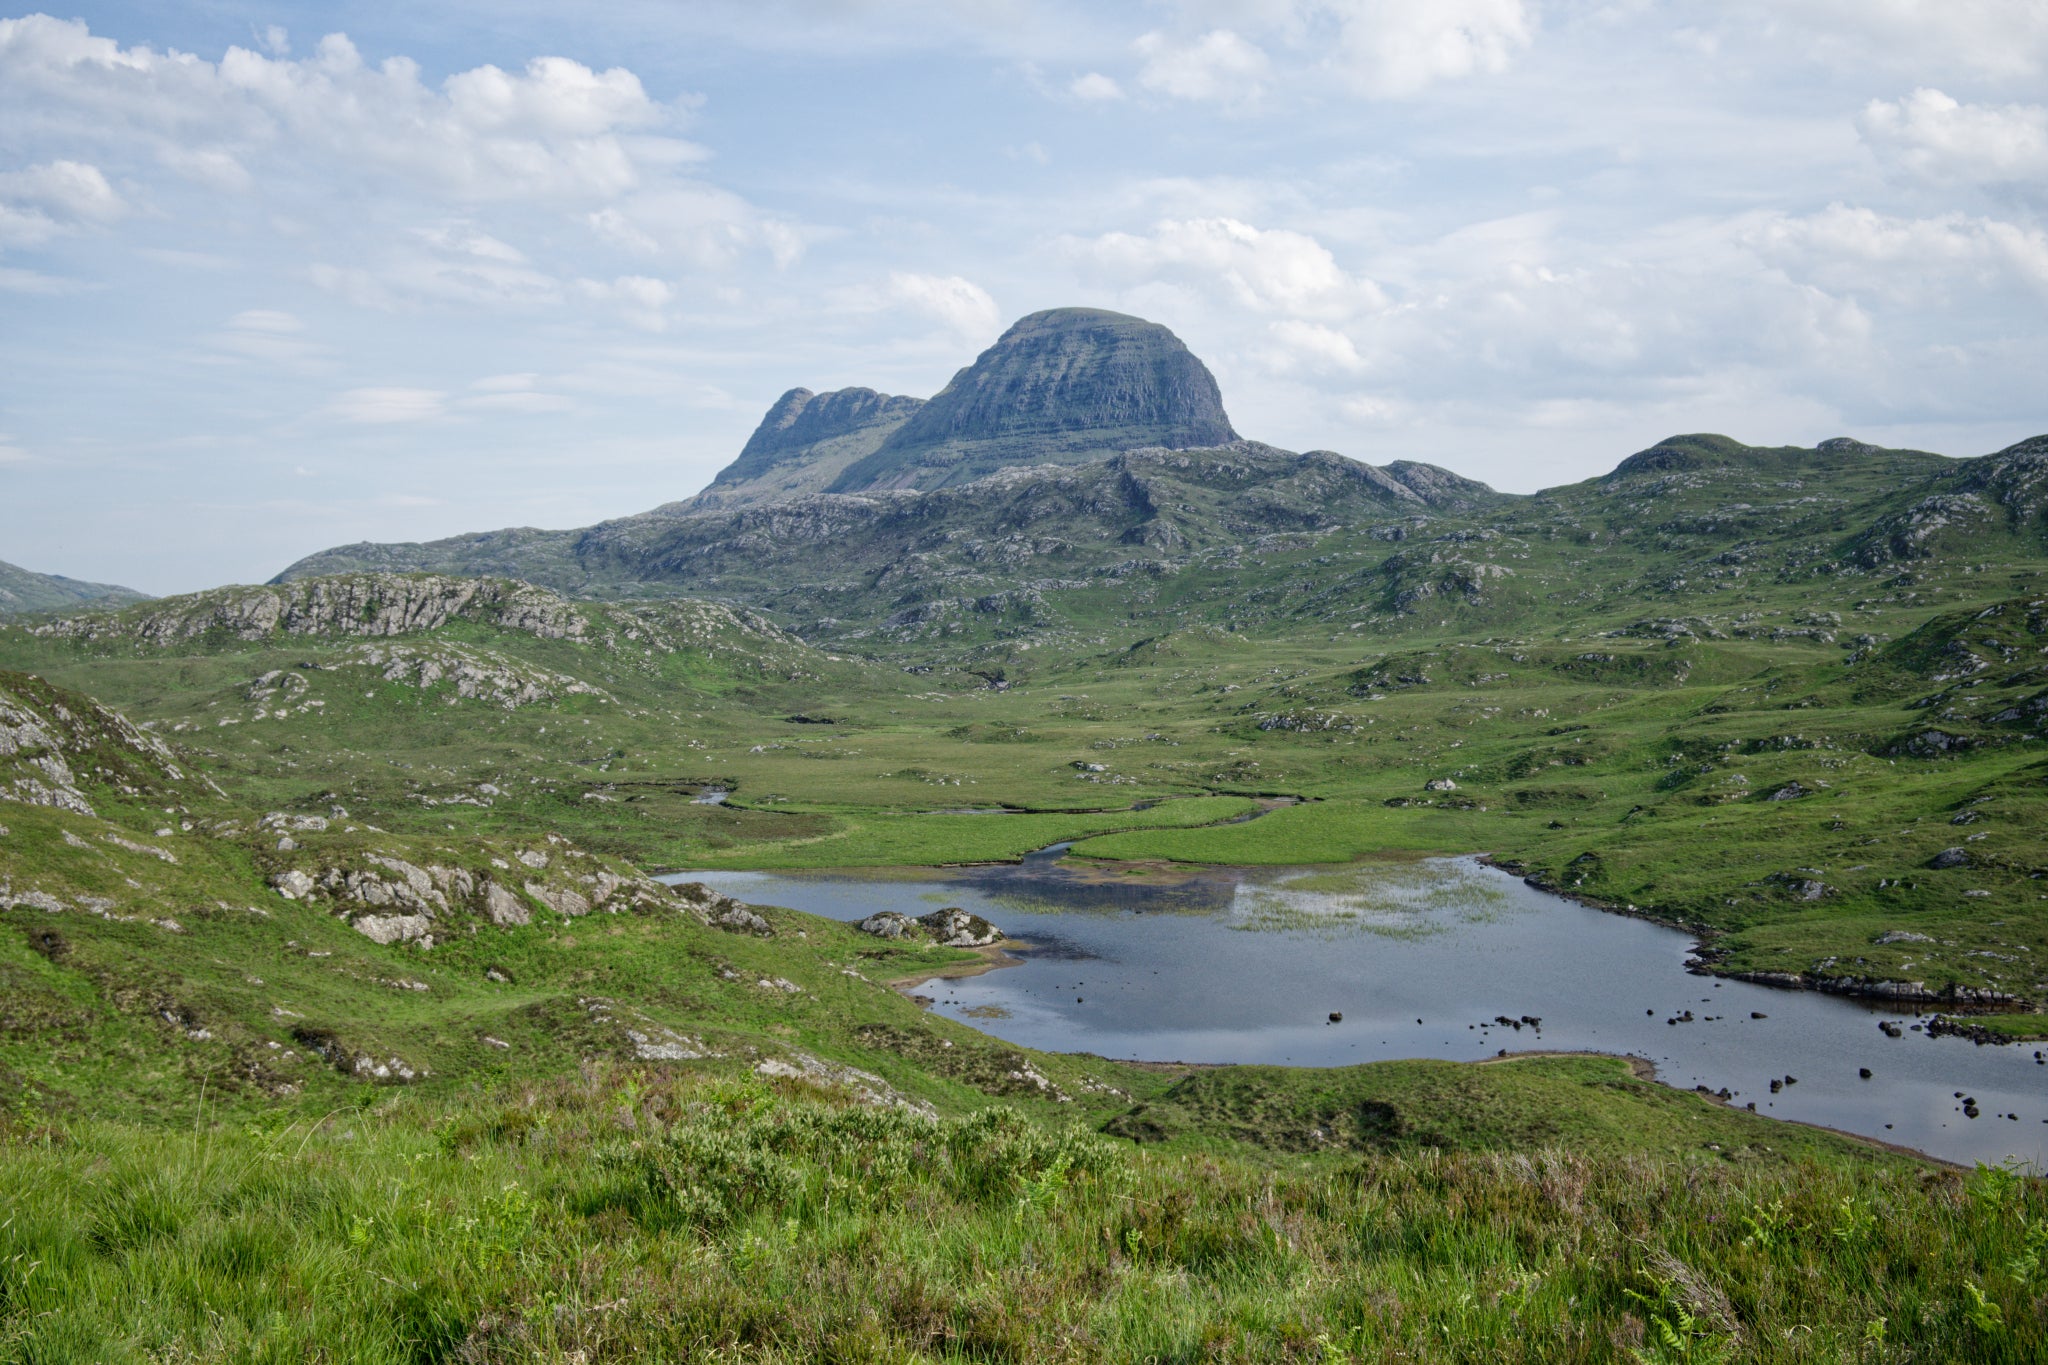 A view towards Suilven mountain, in the Assynt area of Scotland’s west coast